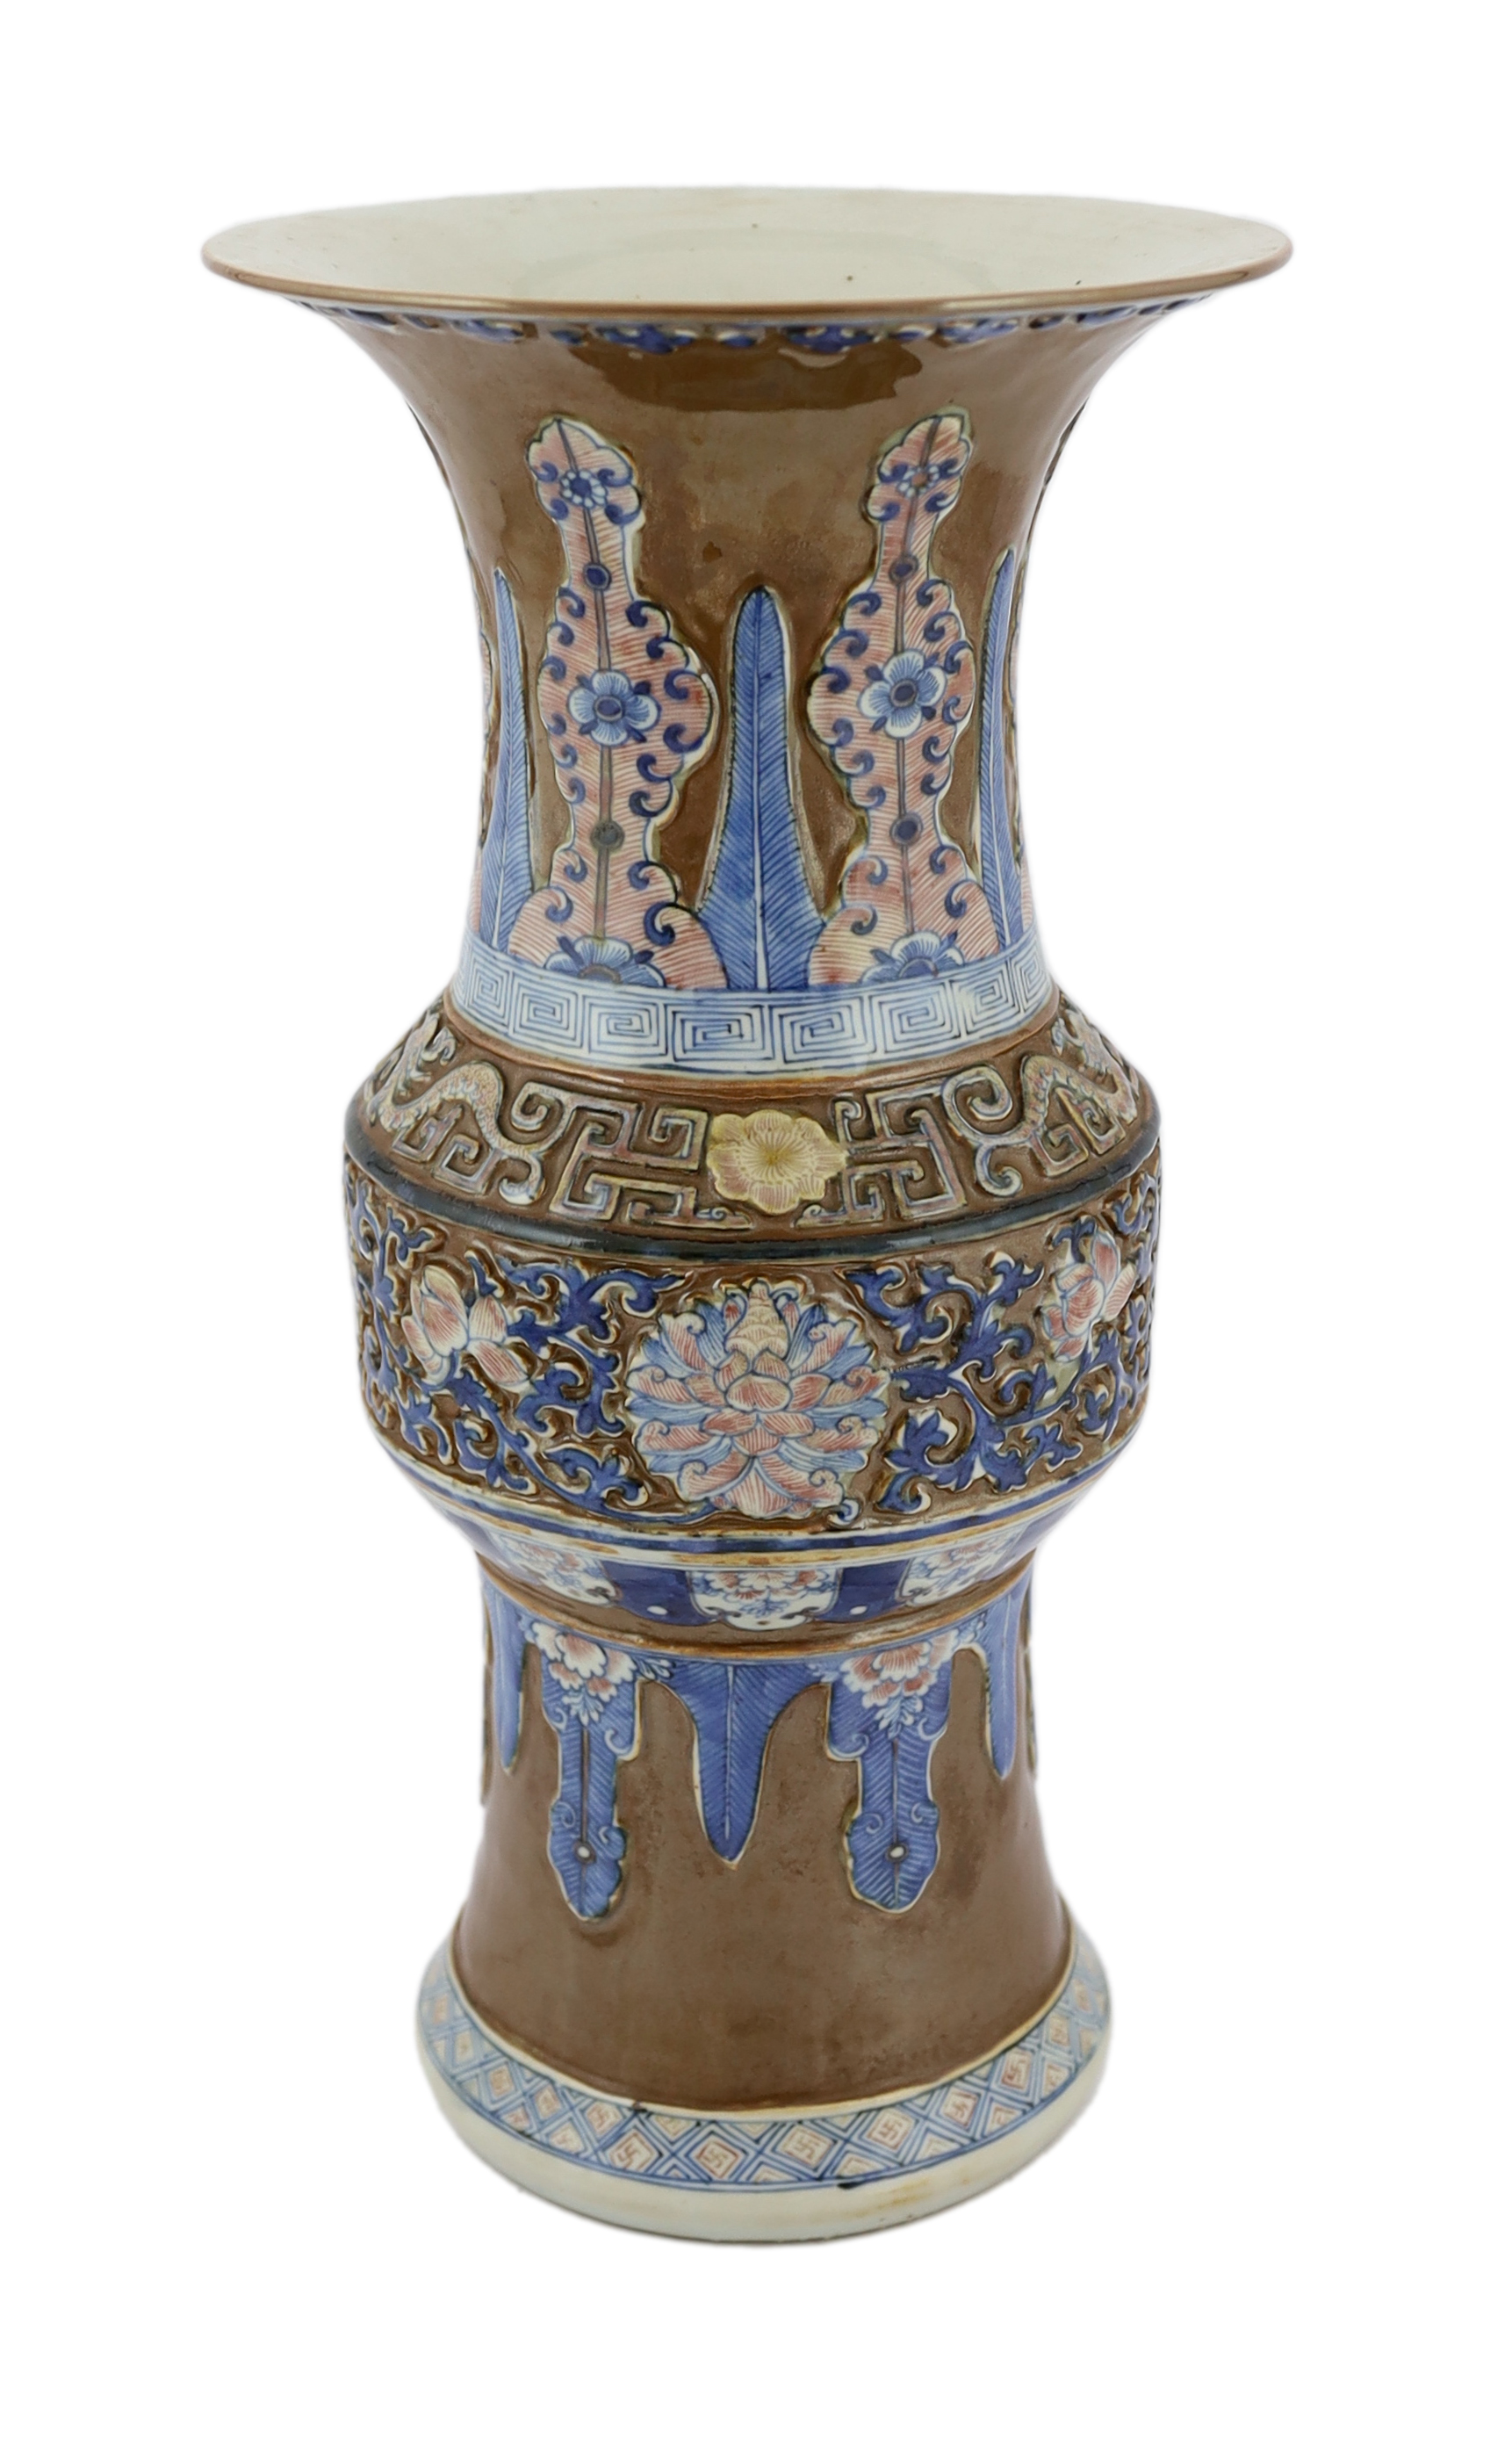 A large Chinese archaistic underglaze blue and copper red vase, zun, late 19th century, decorated